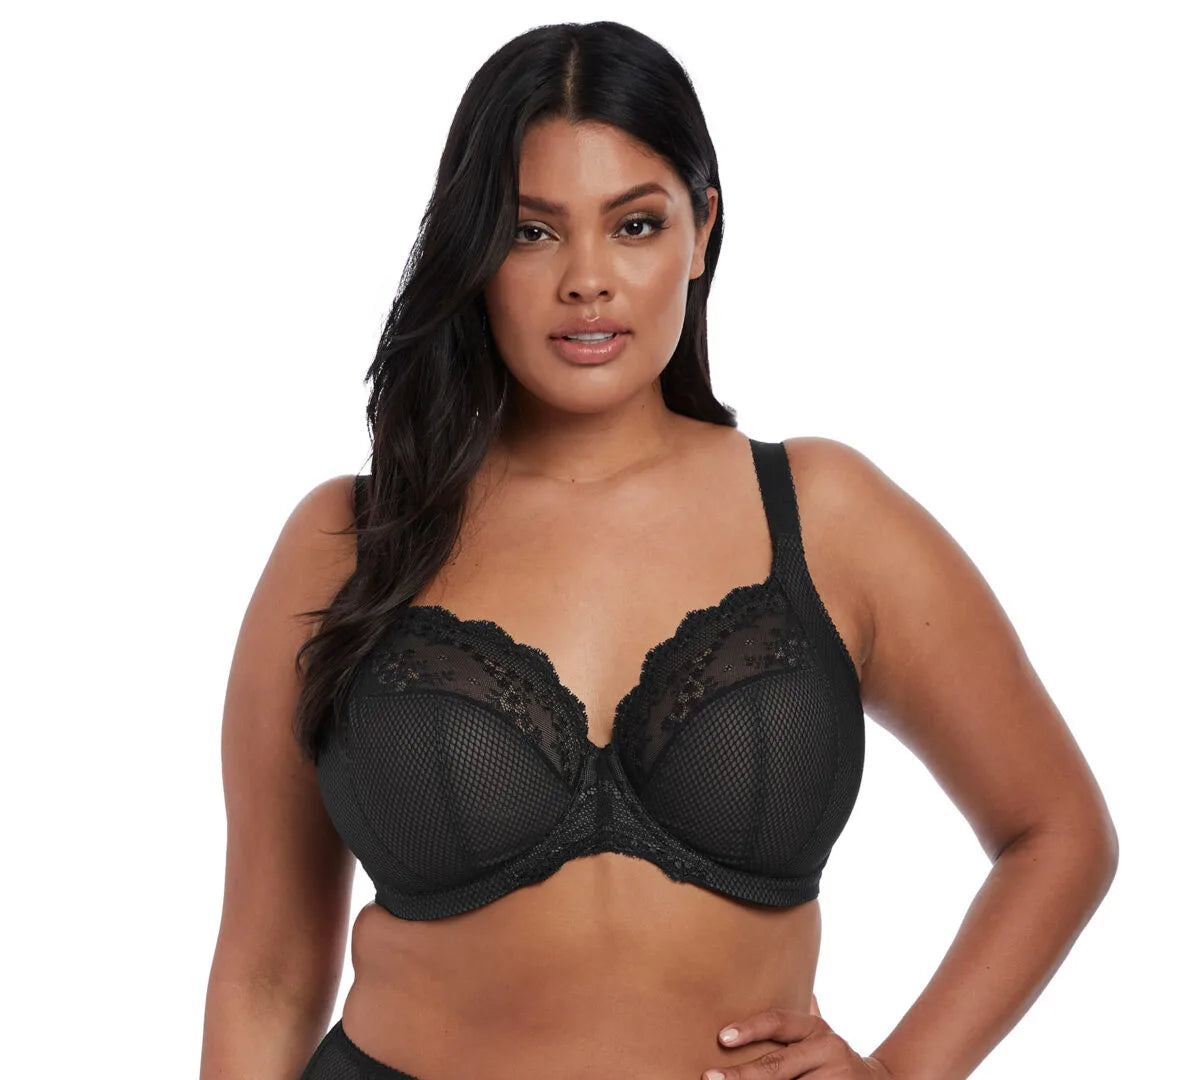 Charley Stretch Lace Plunge Bra from Elomi at Belle Lacet Lingerie